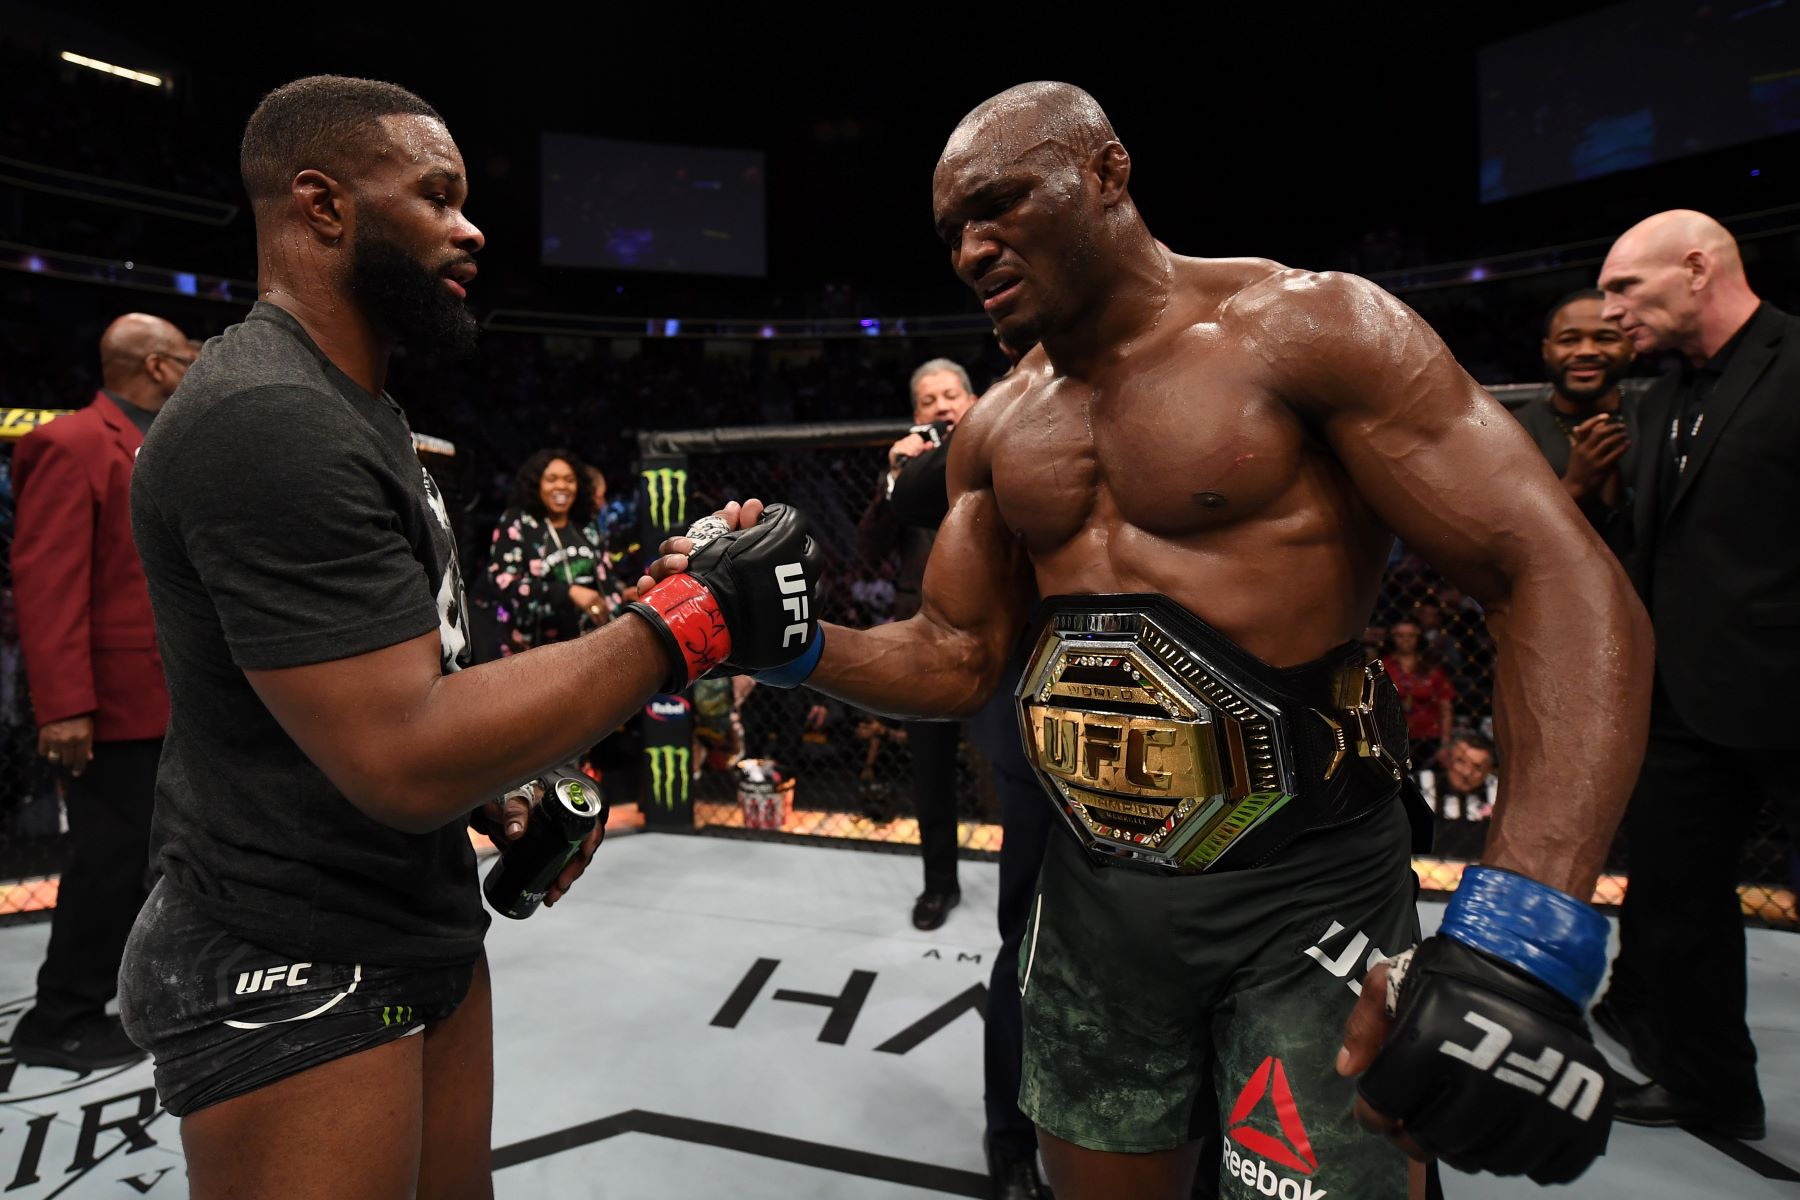 Tyron Woodley and Kamaru Usman after the UFC Welterweight championship match at UFC 235 in Las Vegas, Nevada